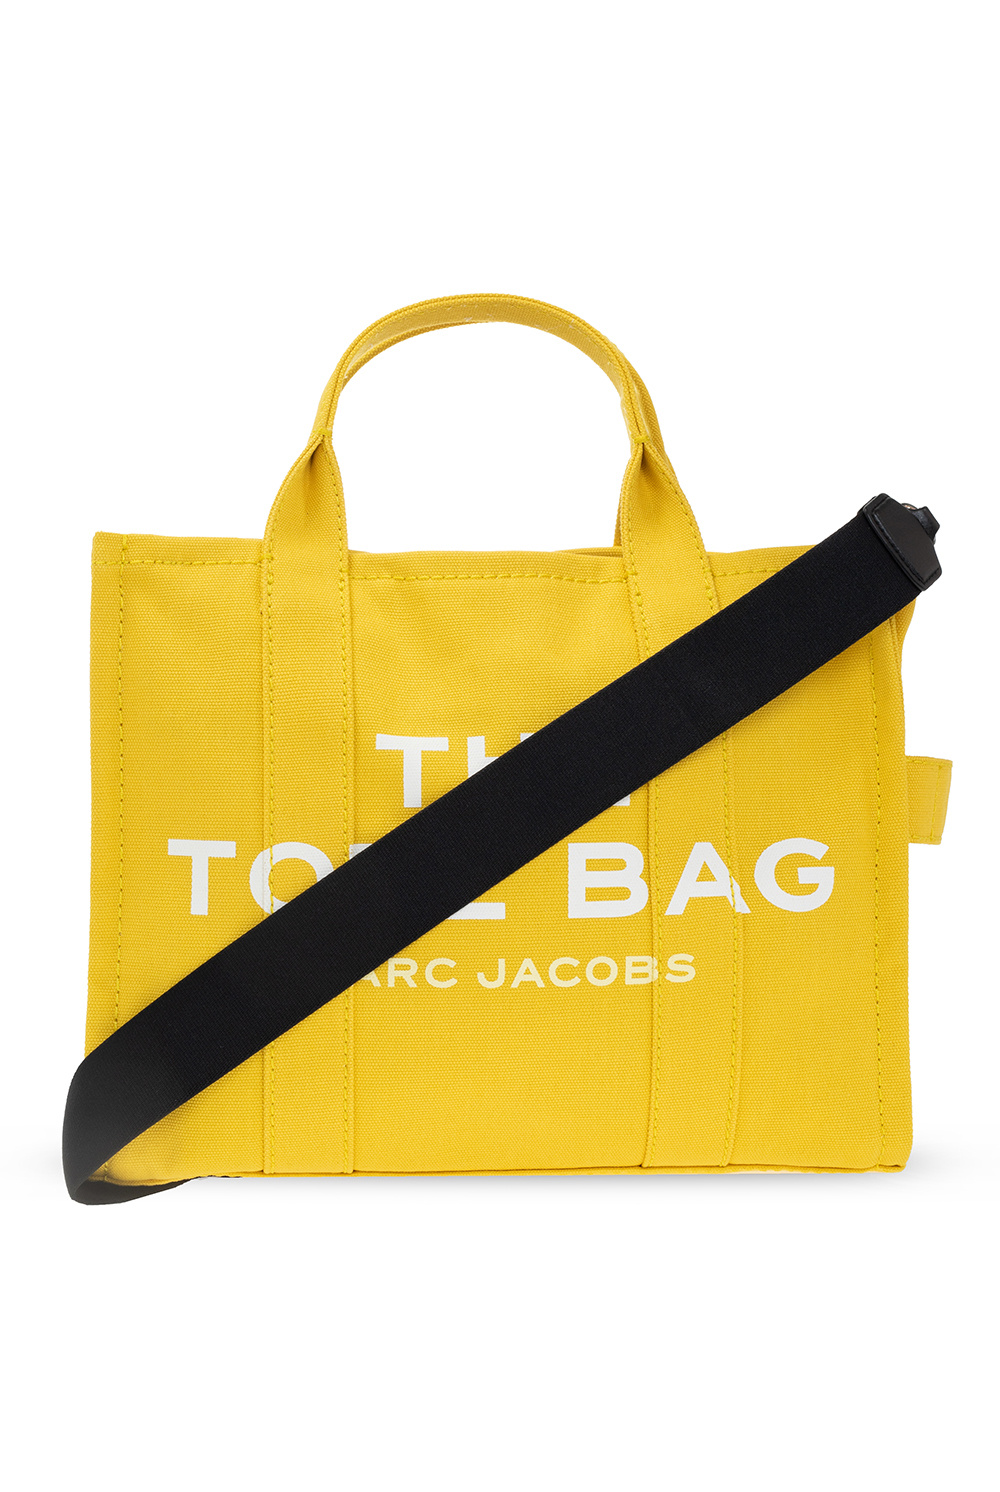 Marc Jacobs Tote Bag Real vs. Fake Guide 2023: How Can I Tell If